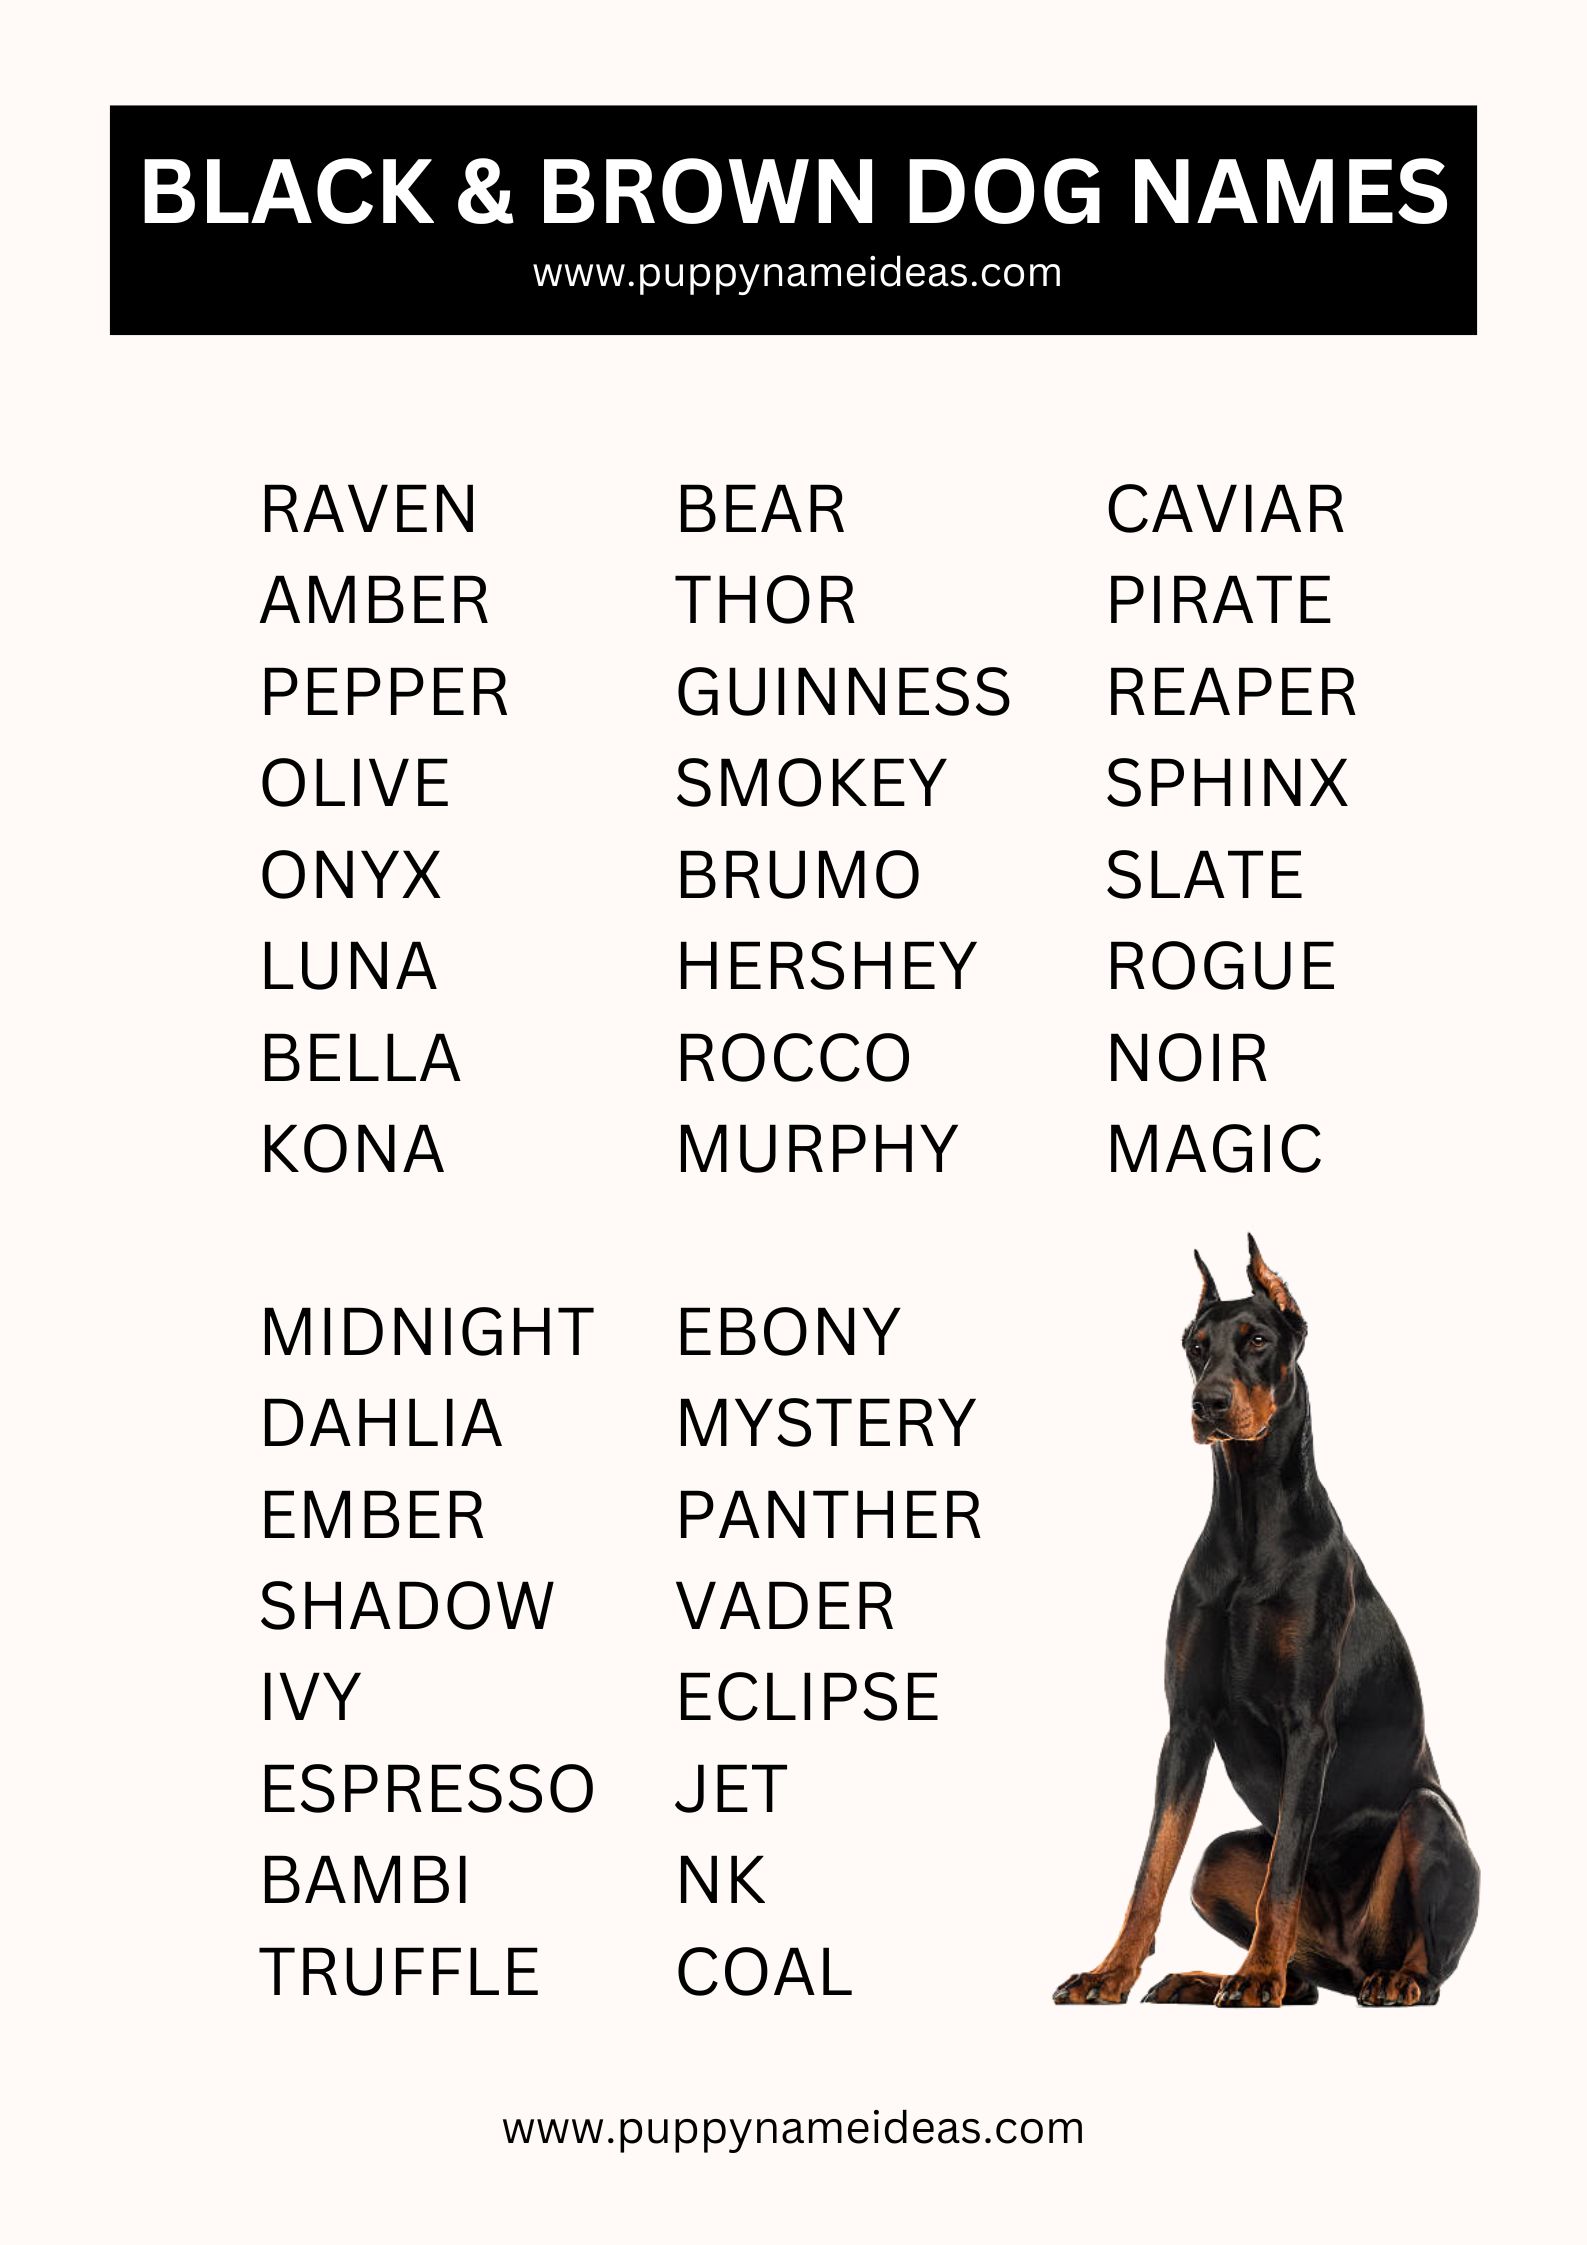 list of black and brown dog names